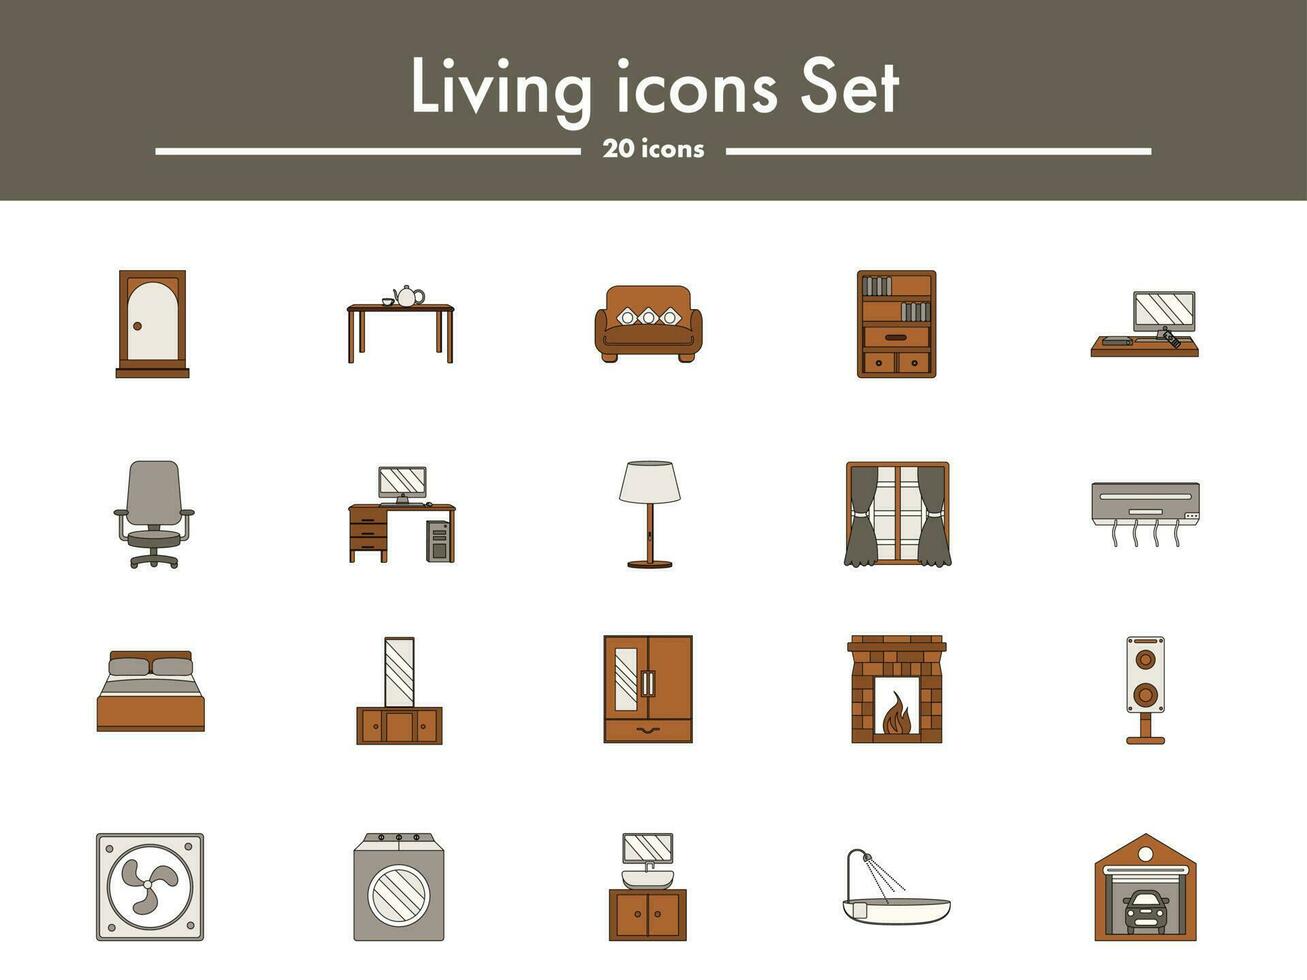 Illustration Of Living Icon Set In Gray And Brown Color. vector